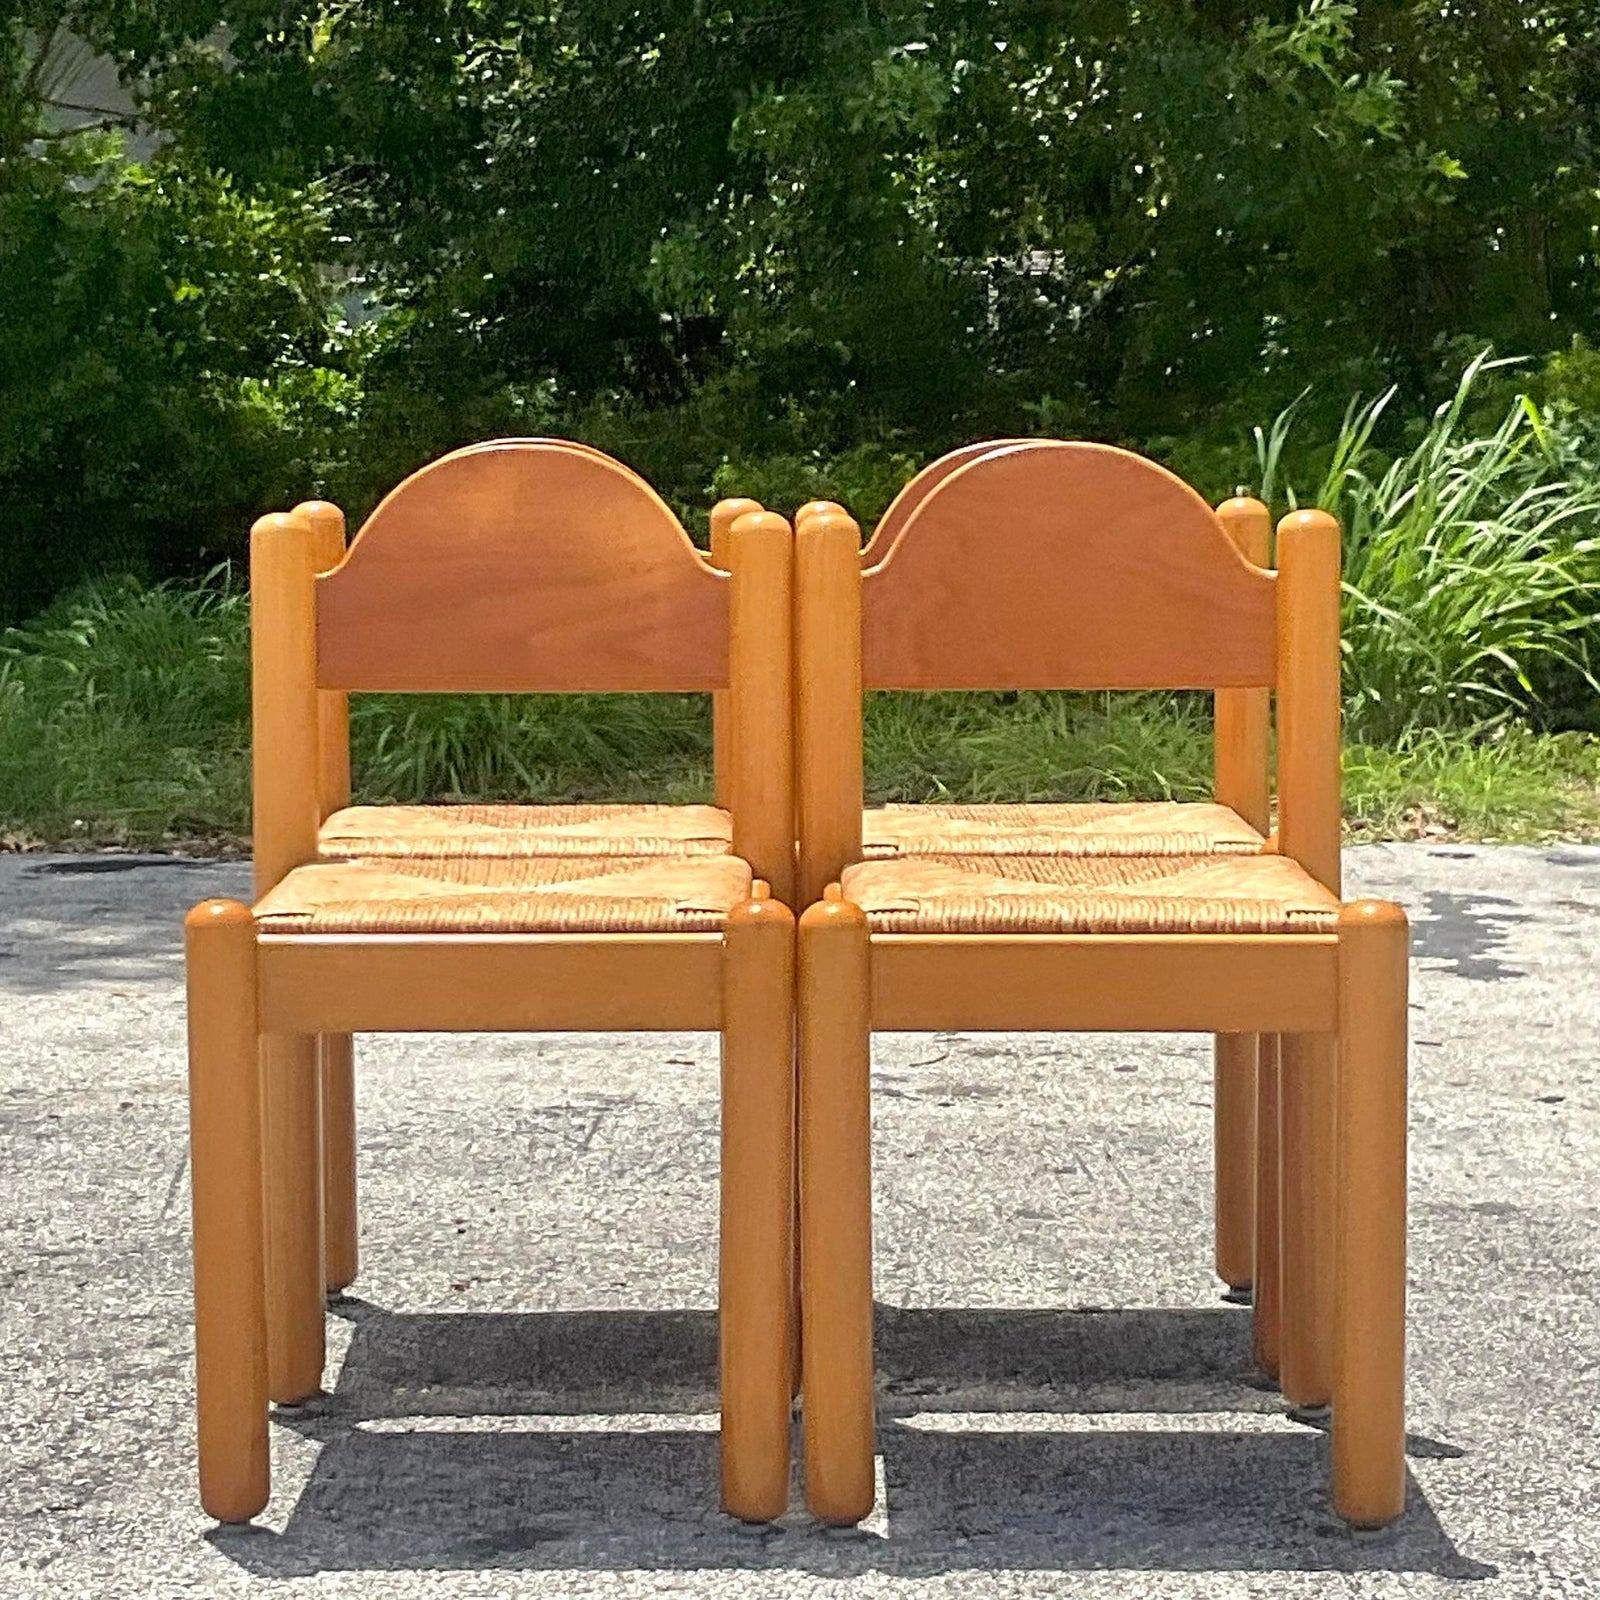 Vintage Boho Italian Padova Chairs After Hank Lowenstein - Set of 4 For Sale 1